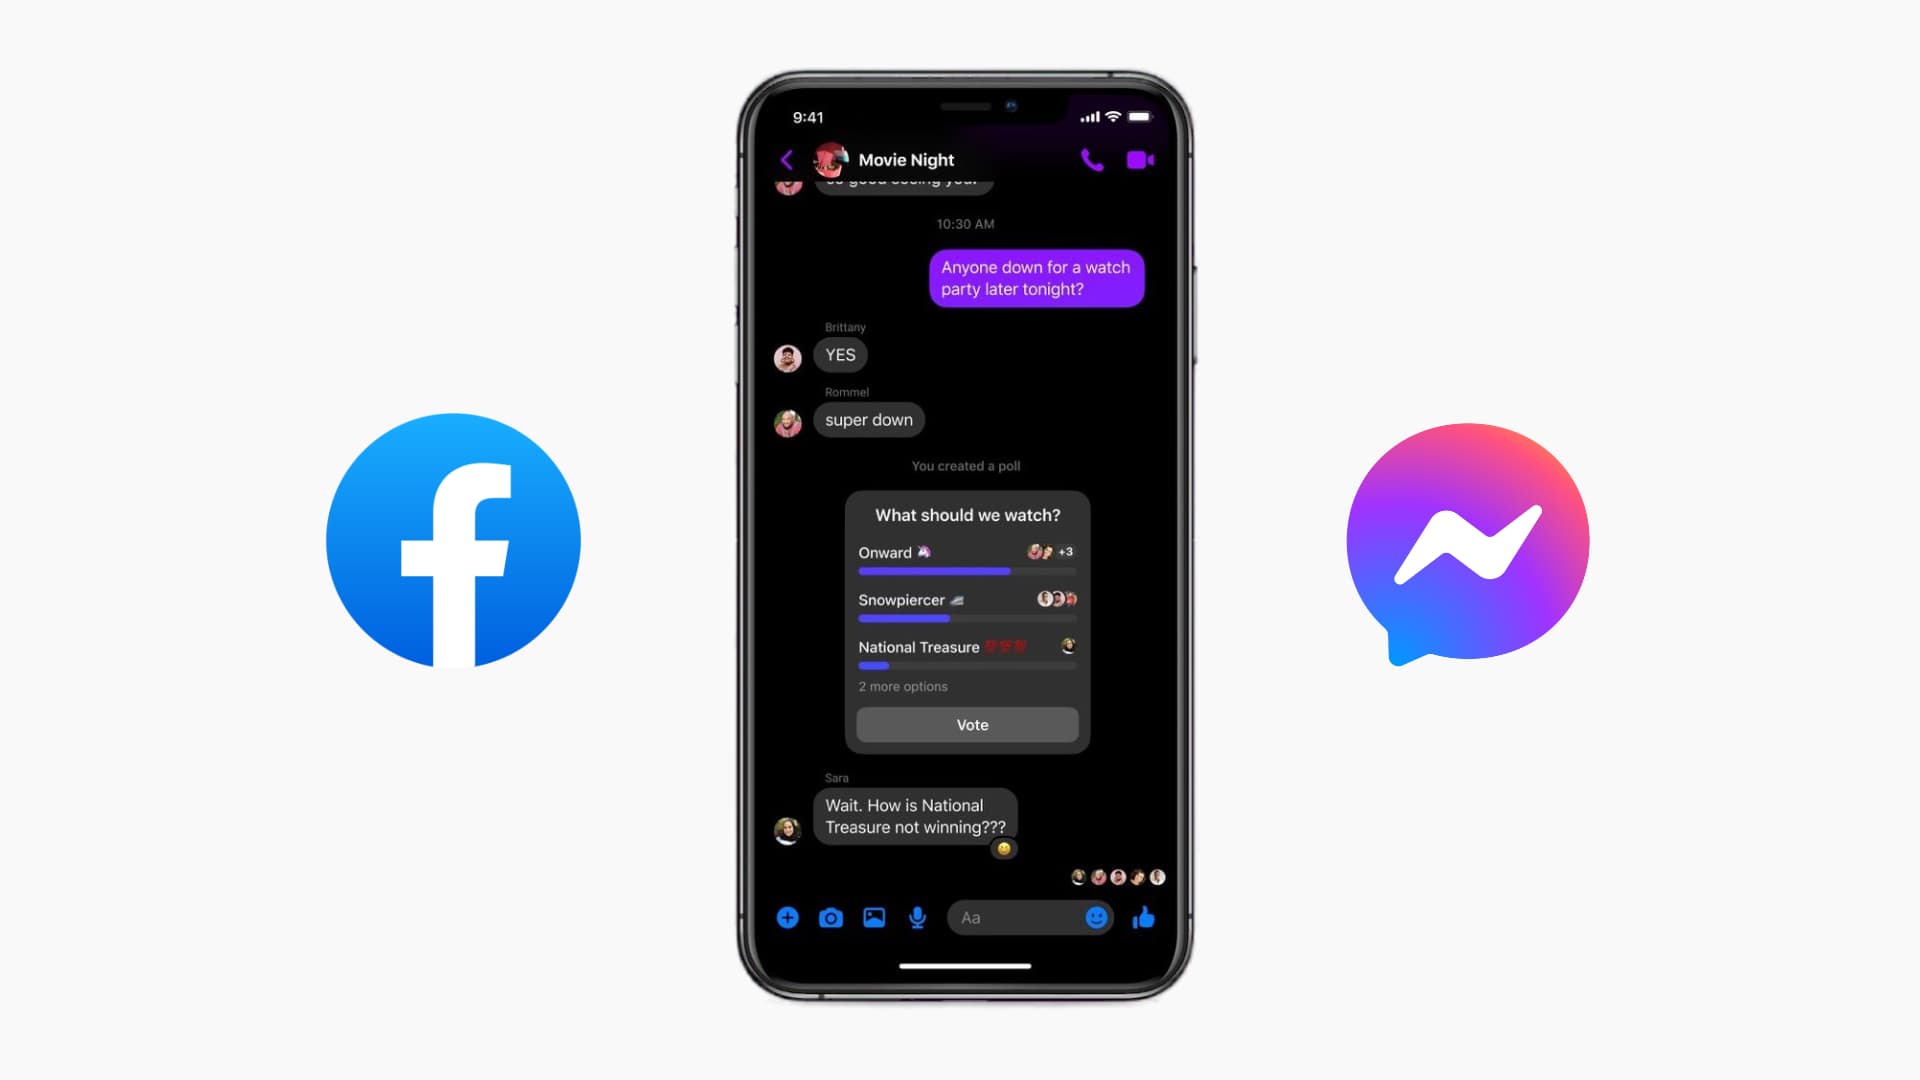 Group chat in Facebook Messenger